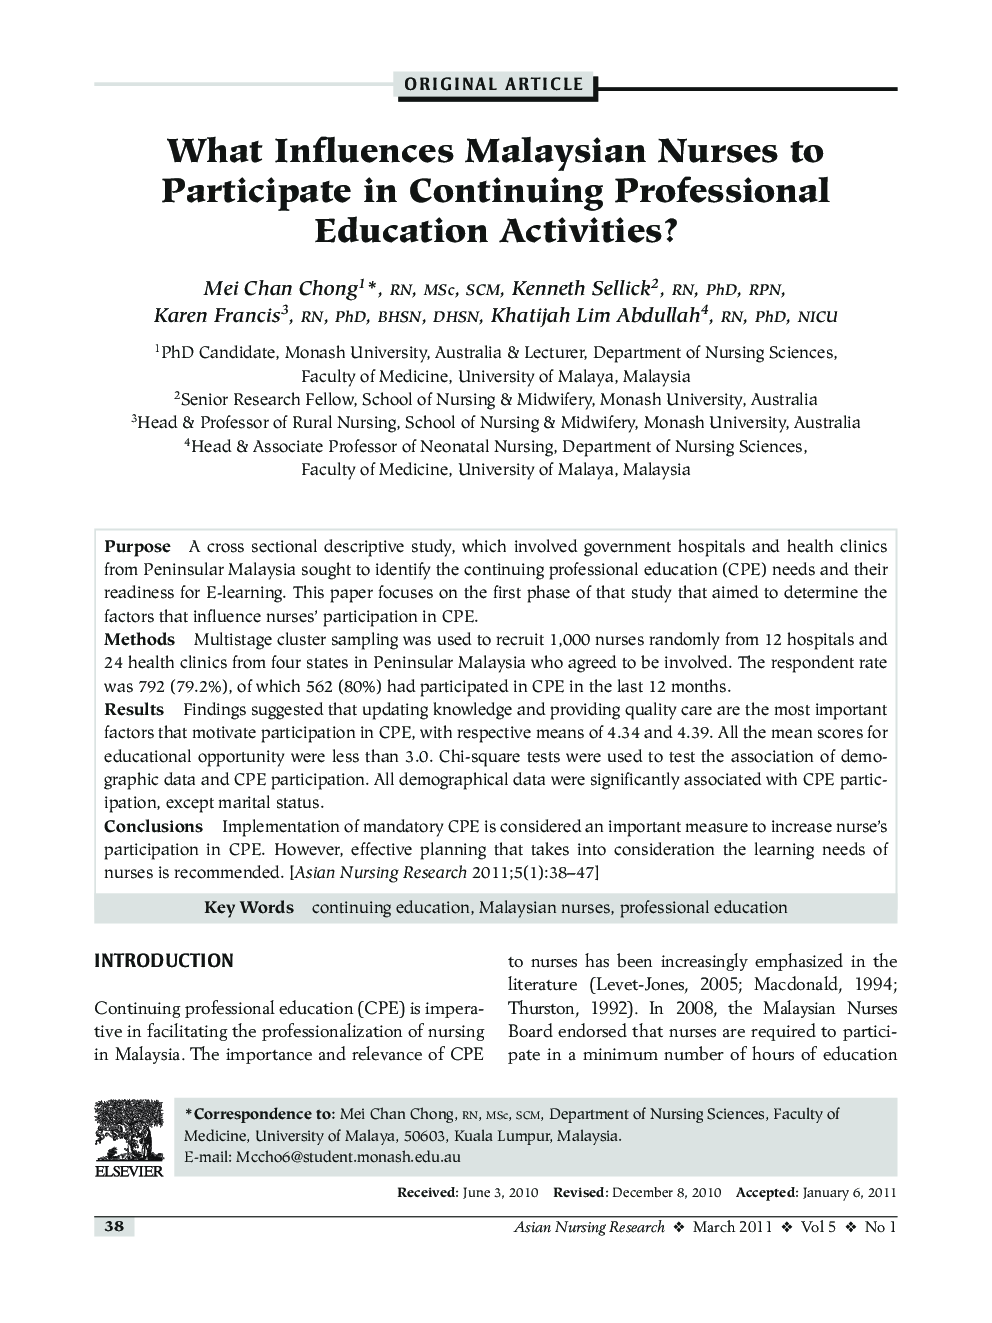 What Influences Malaysian Nurses to Participate in Continuing Professional Education Activities?